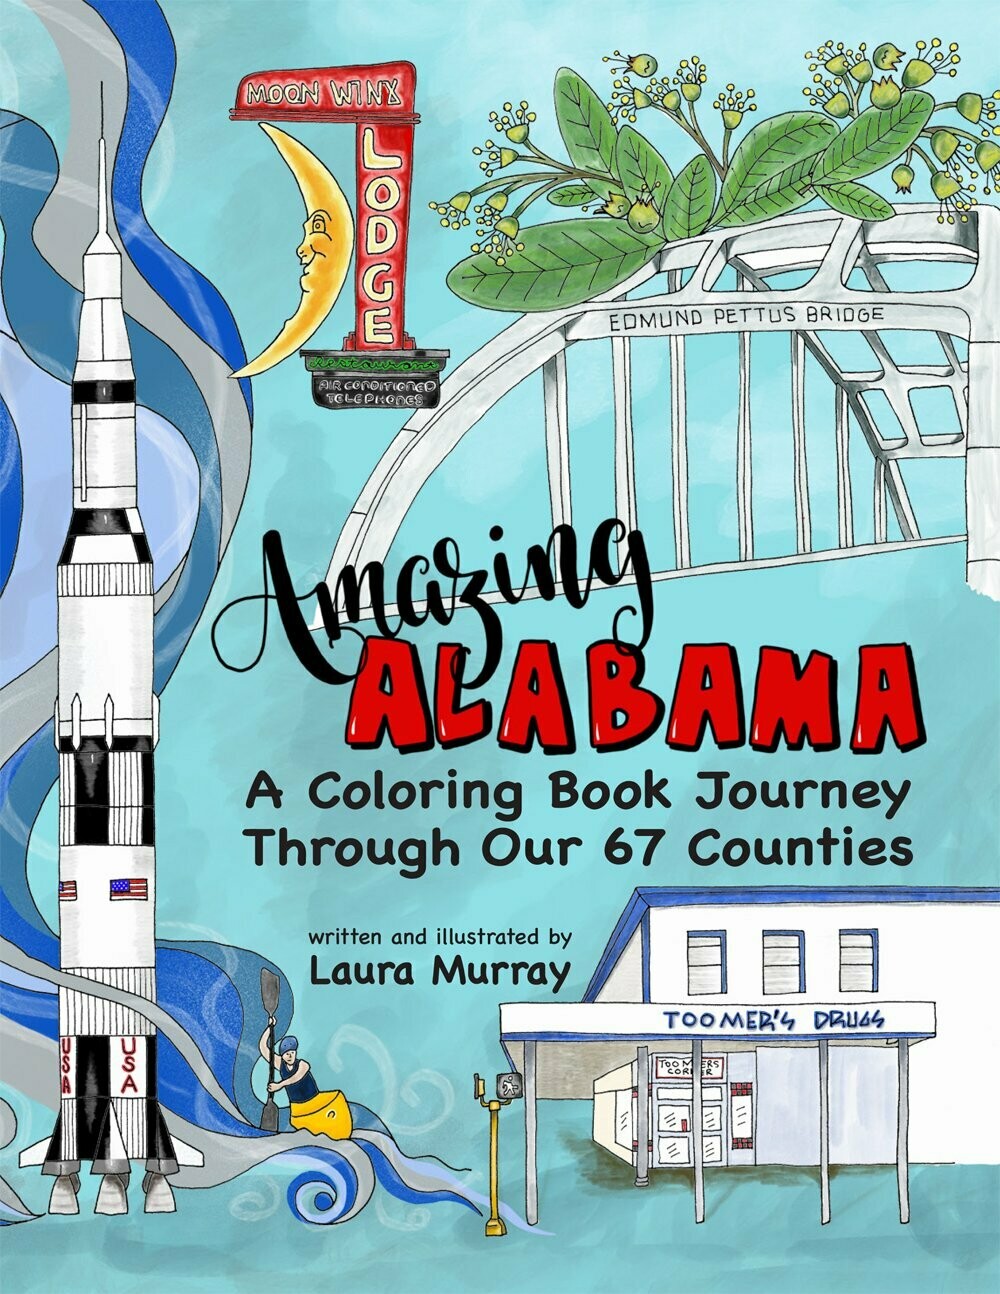 Amazing Alabama: A Coloring Book Journey Through Our 67 Counties by Laura Murray